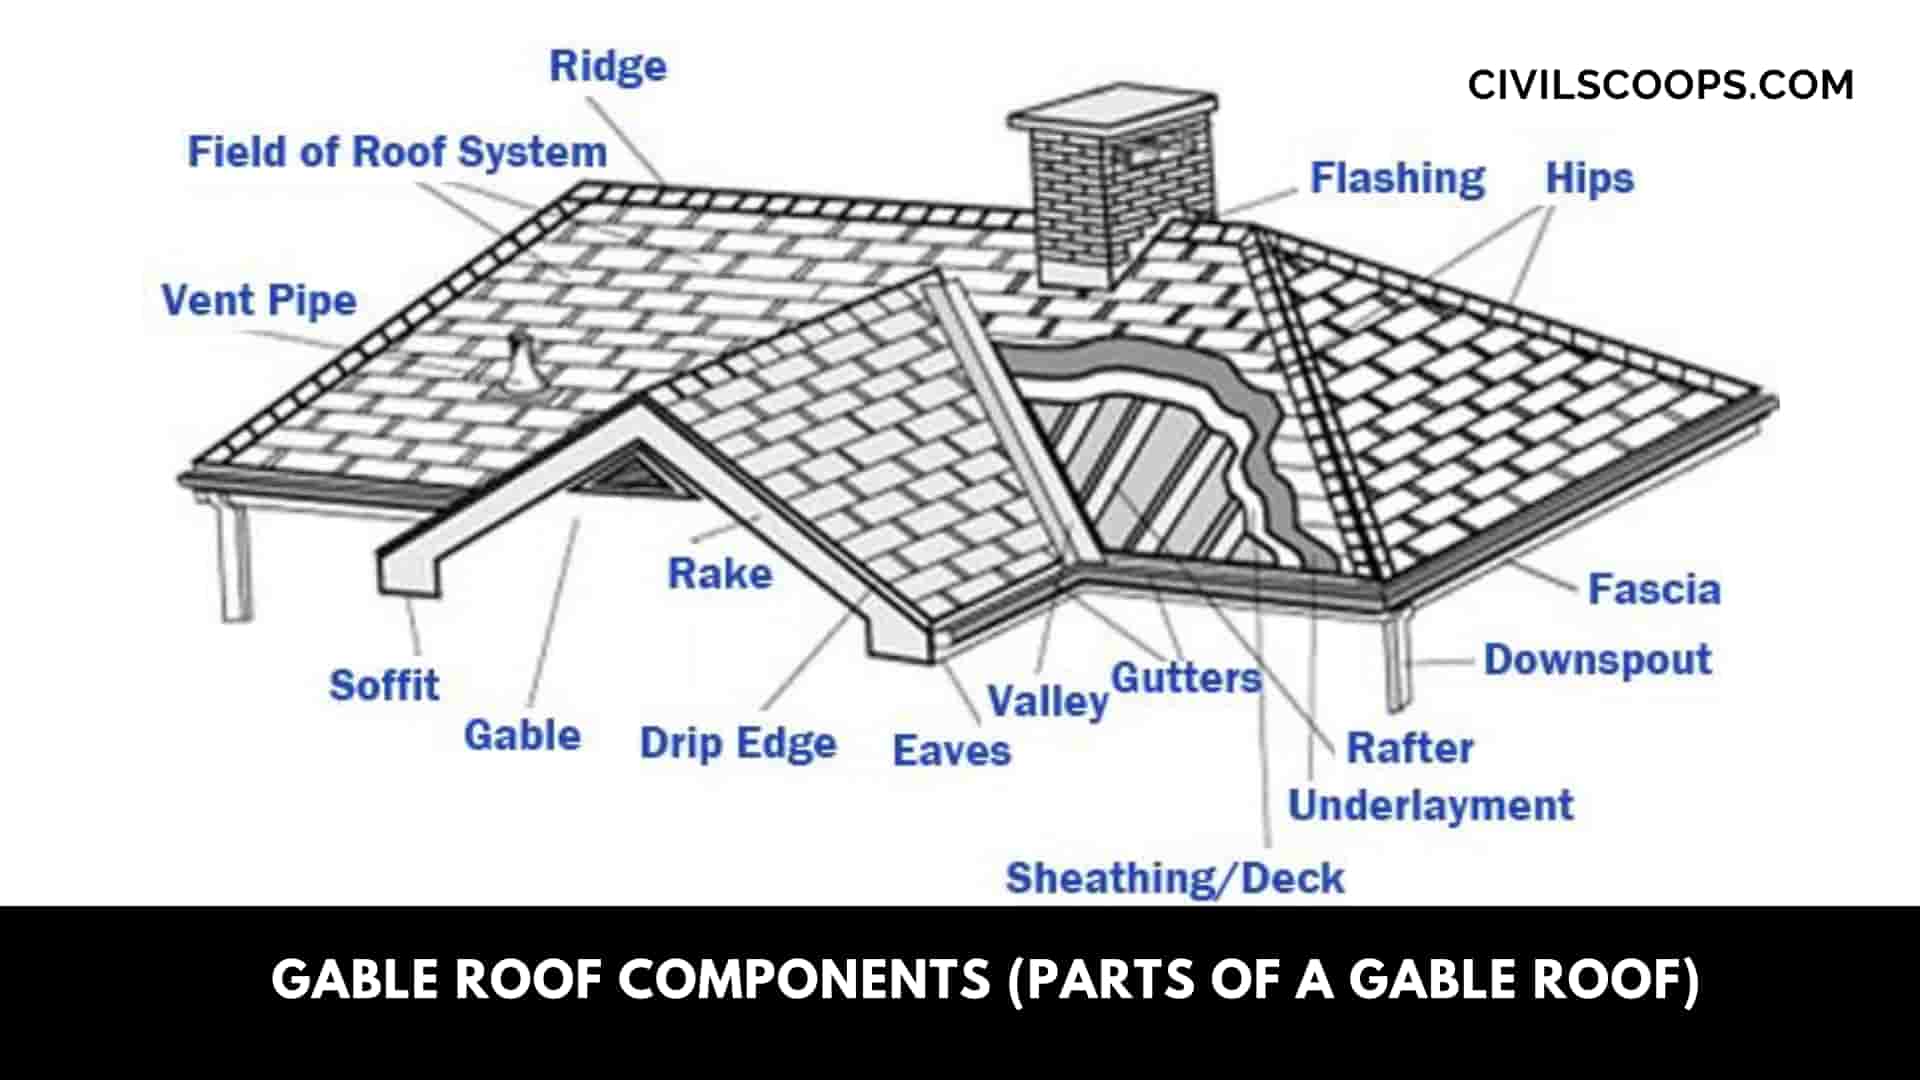 Gable Roof Components (Parts of a Gable Roof)